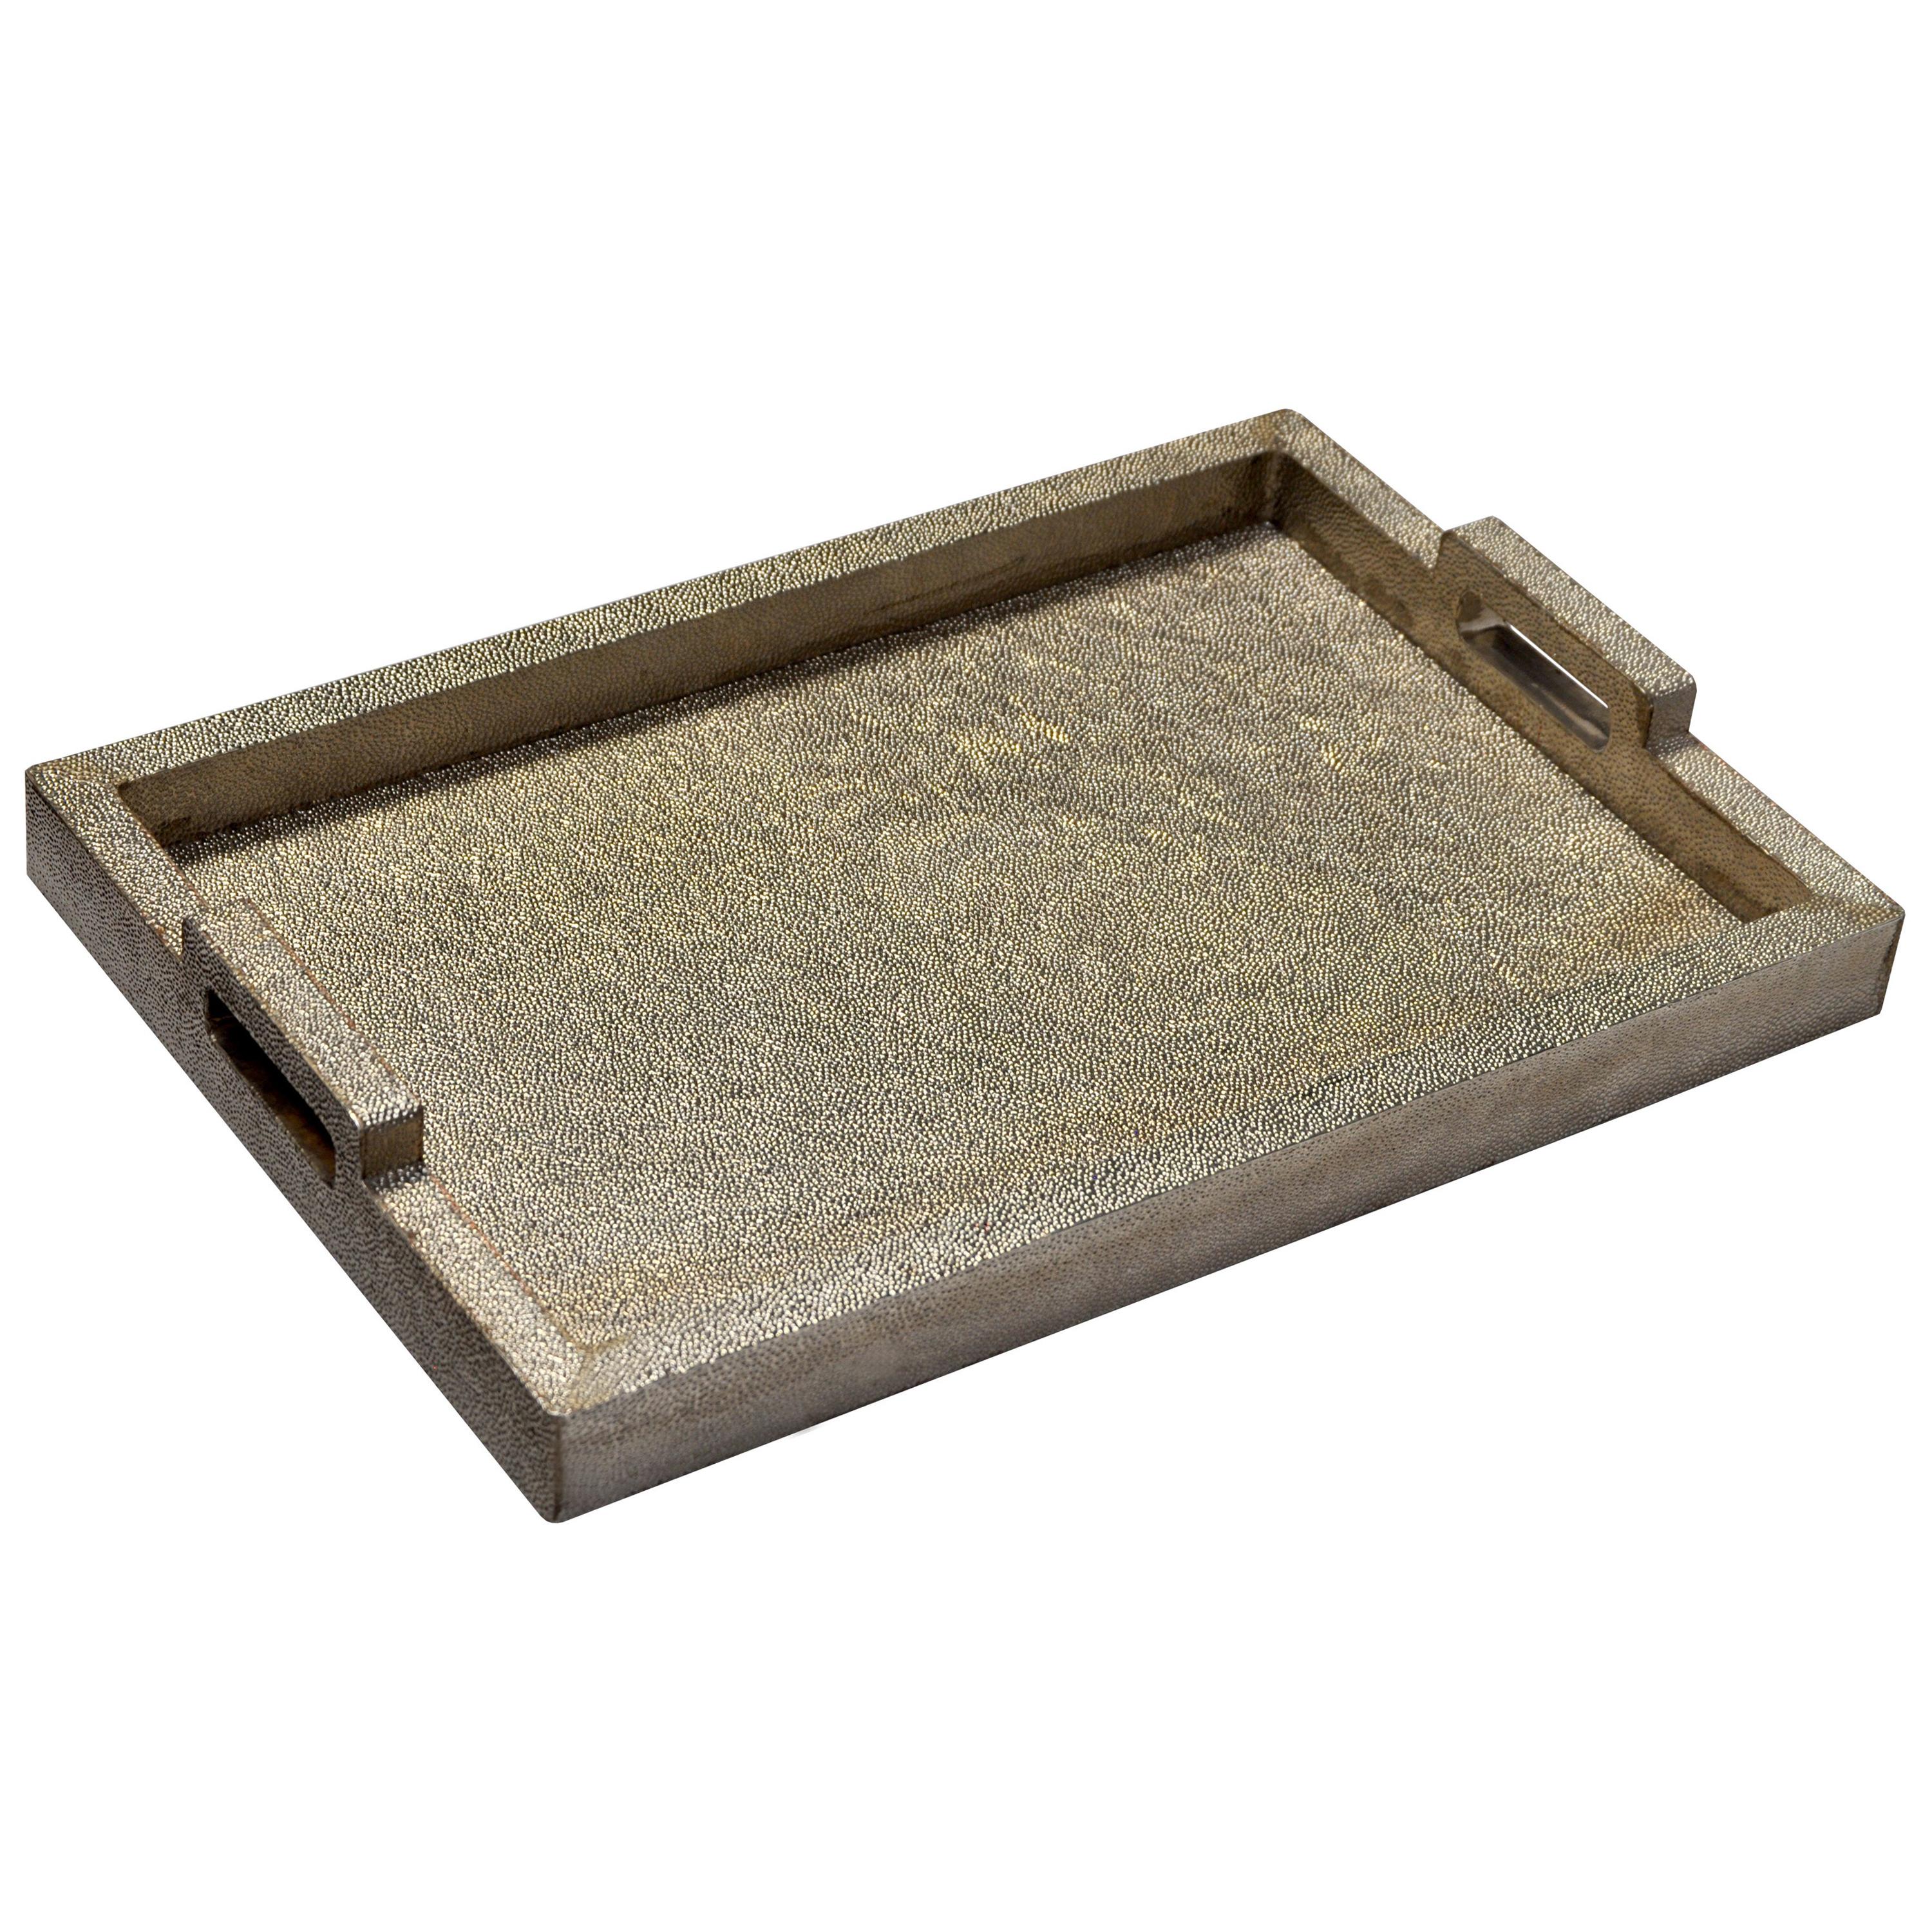 Rectangular Metal Tray in White Bronze Clad Over MDF by Stephanie Odegard